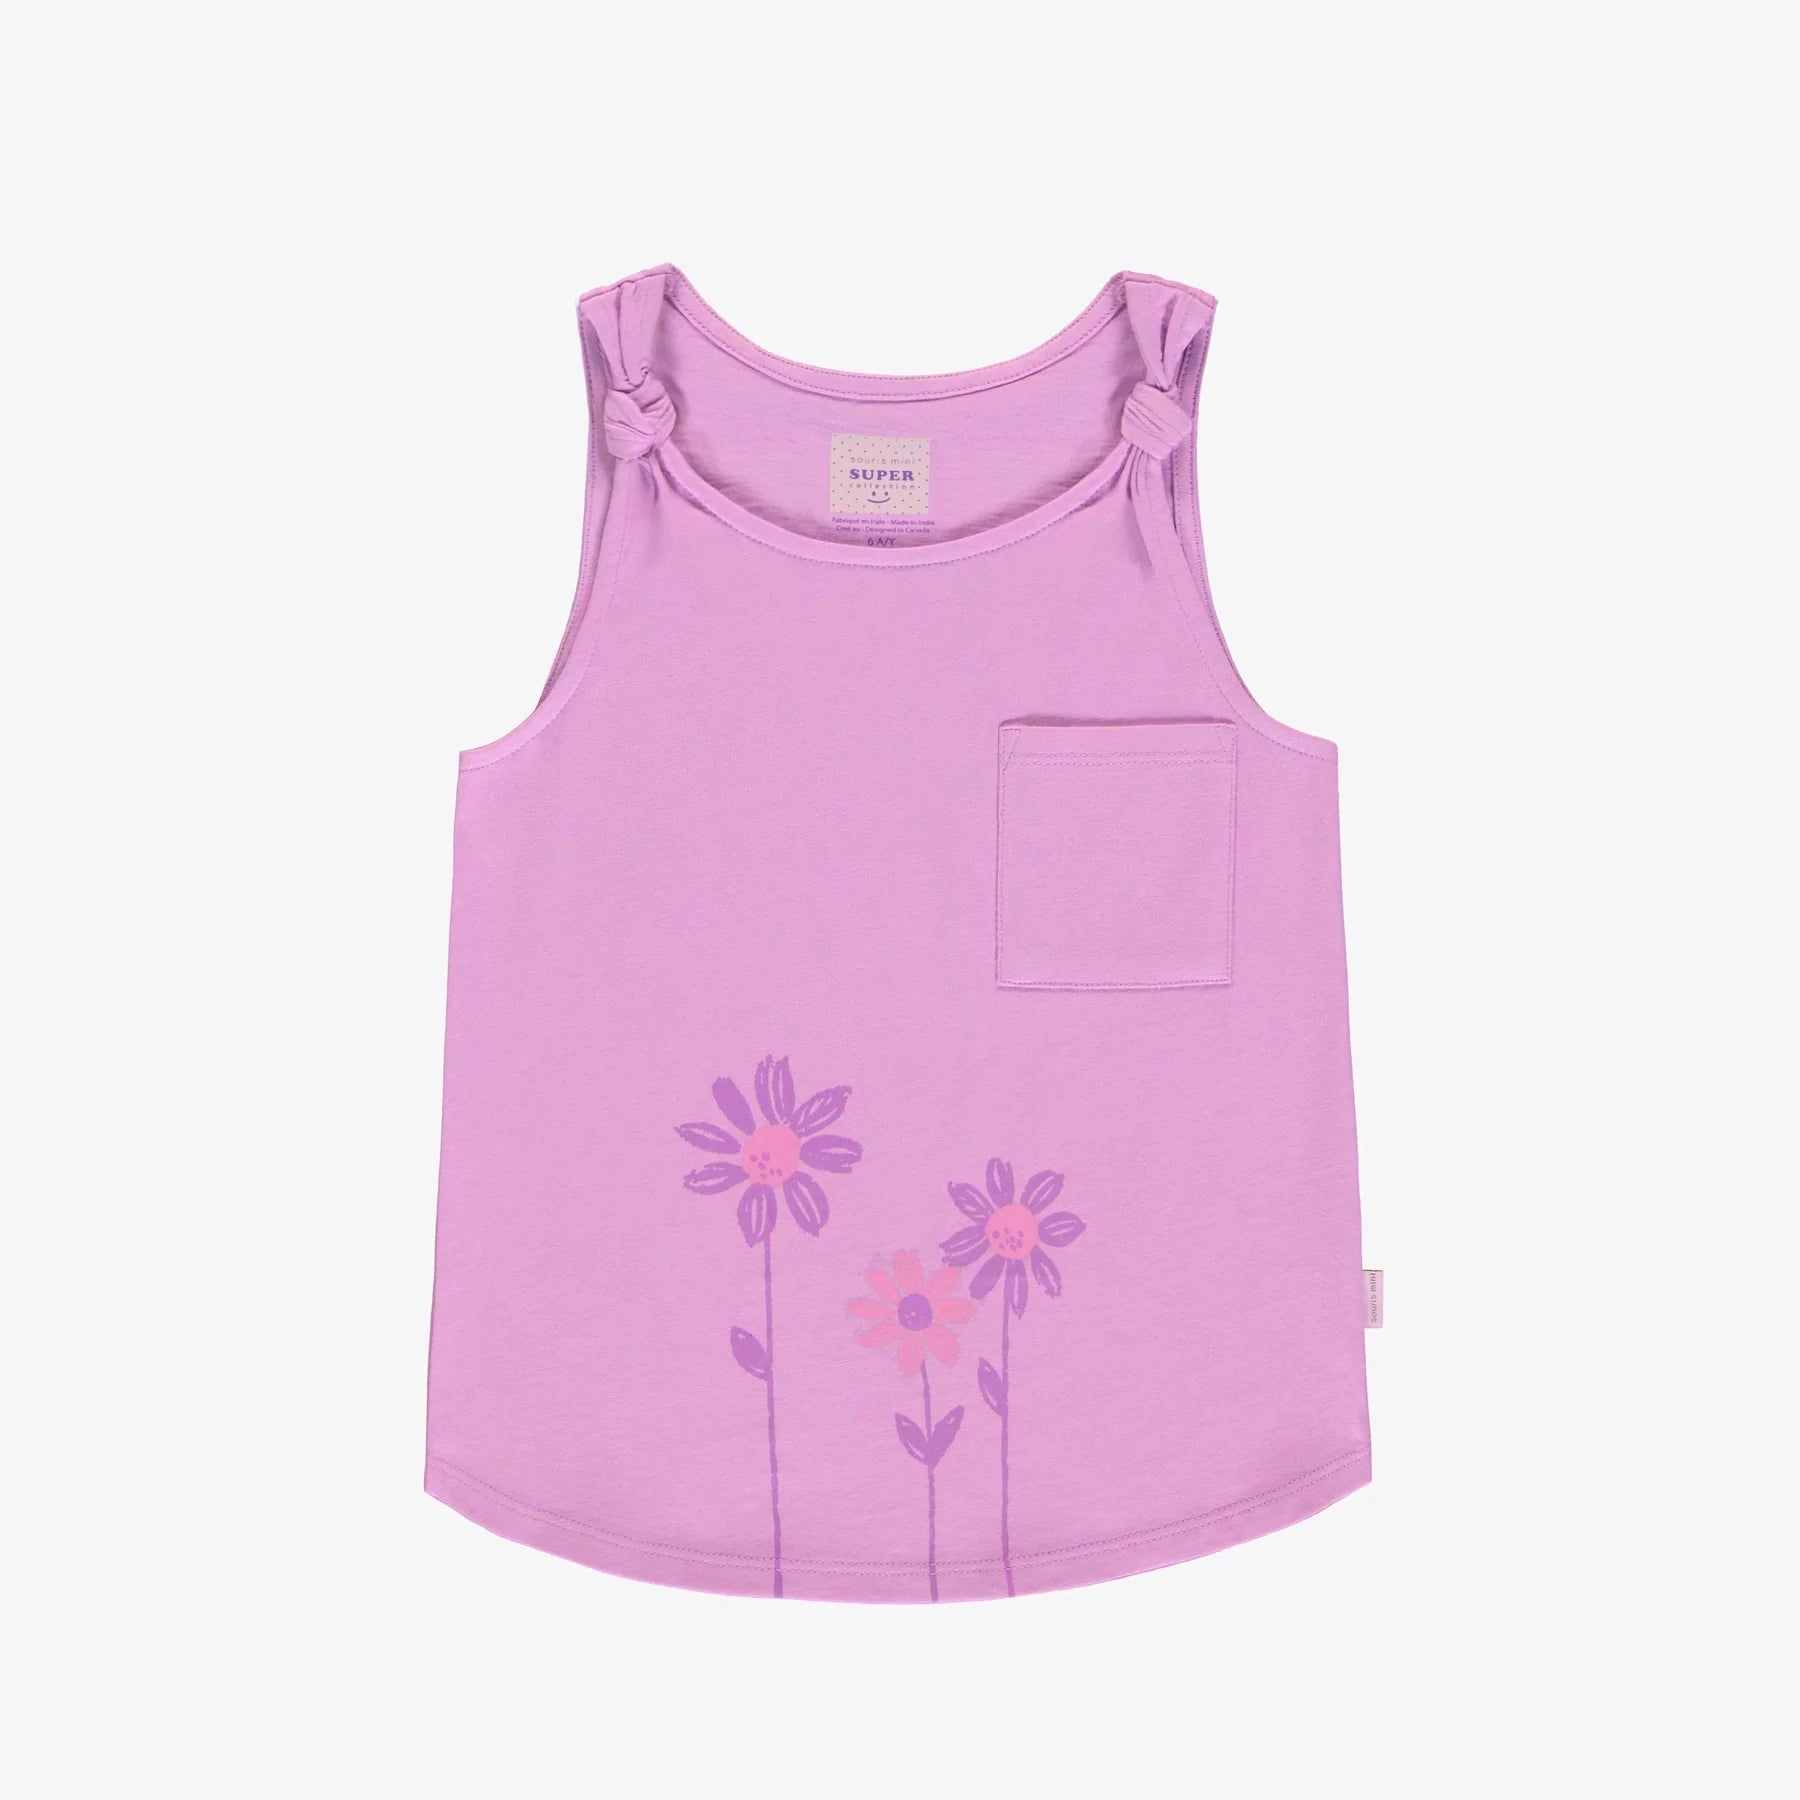 Tank Top with purple flower